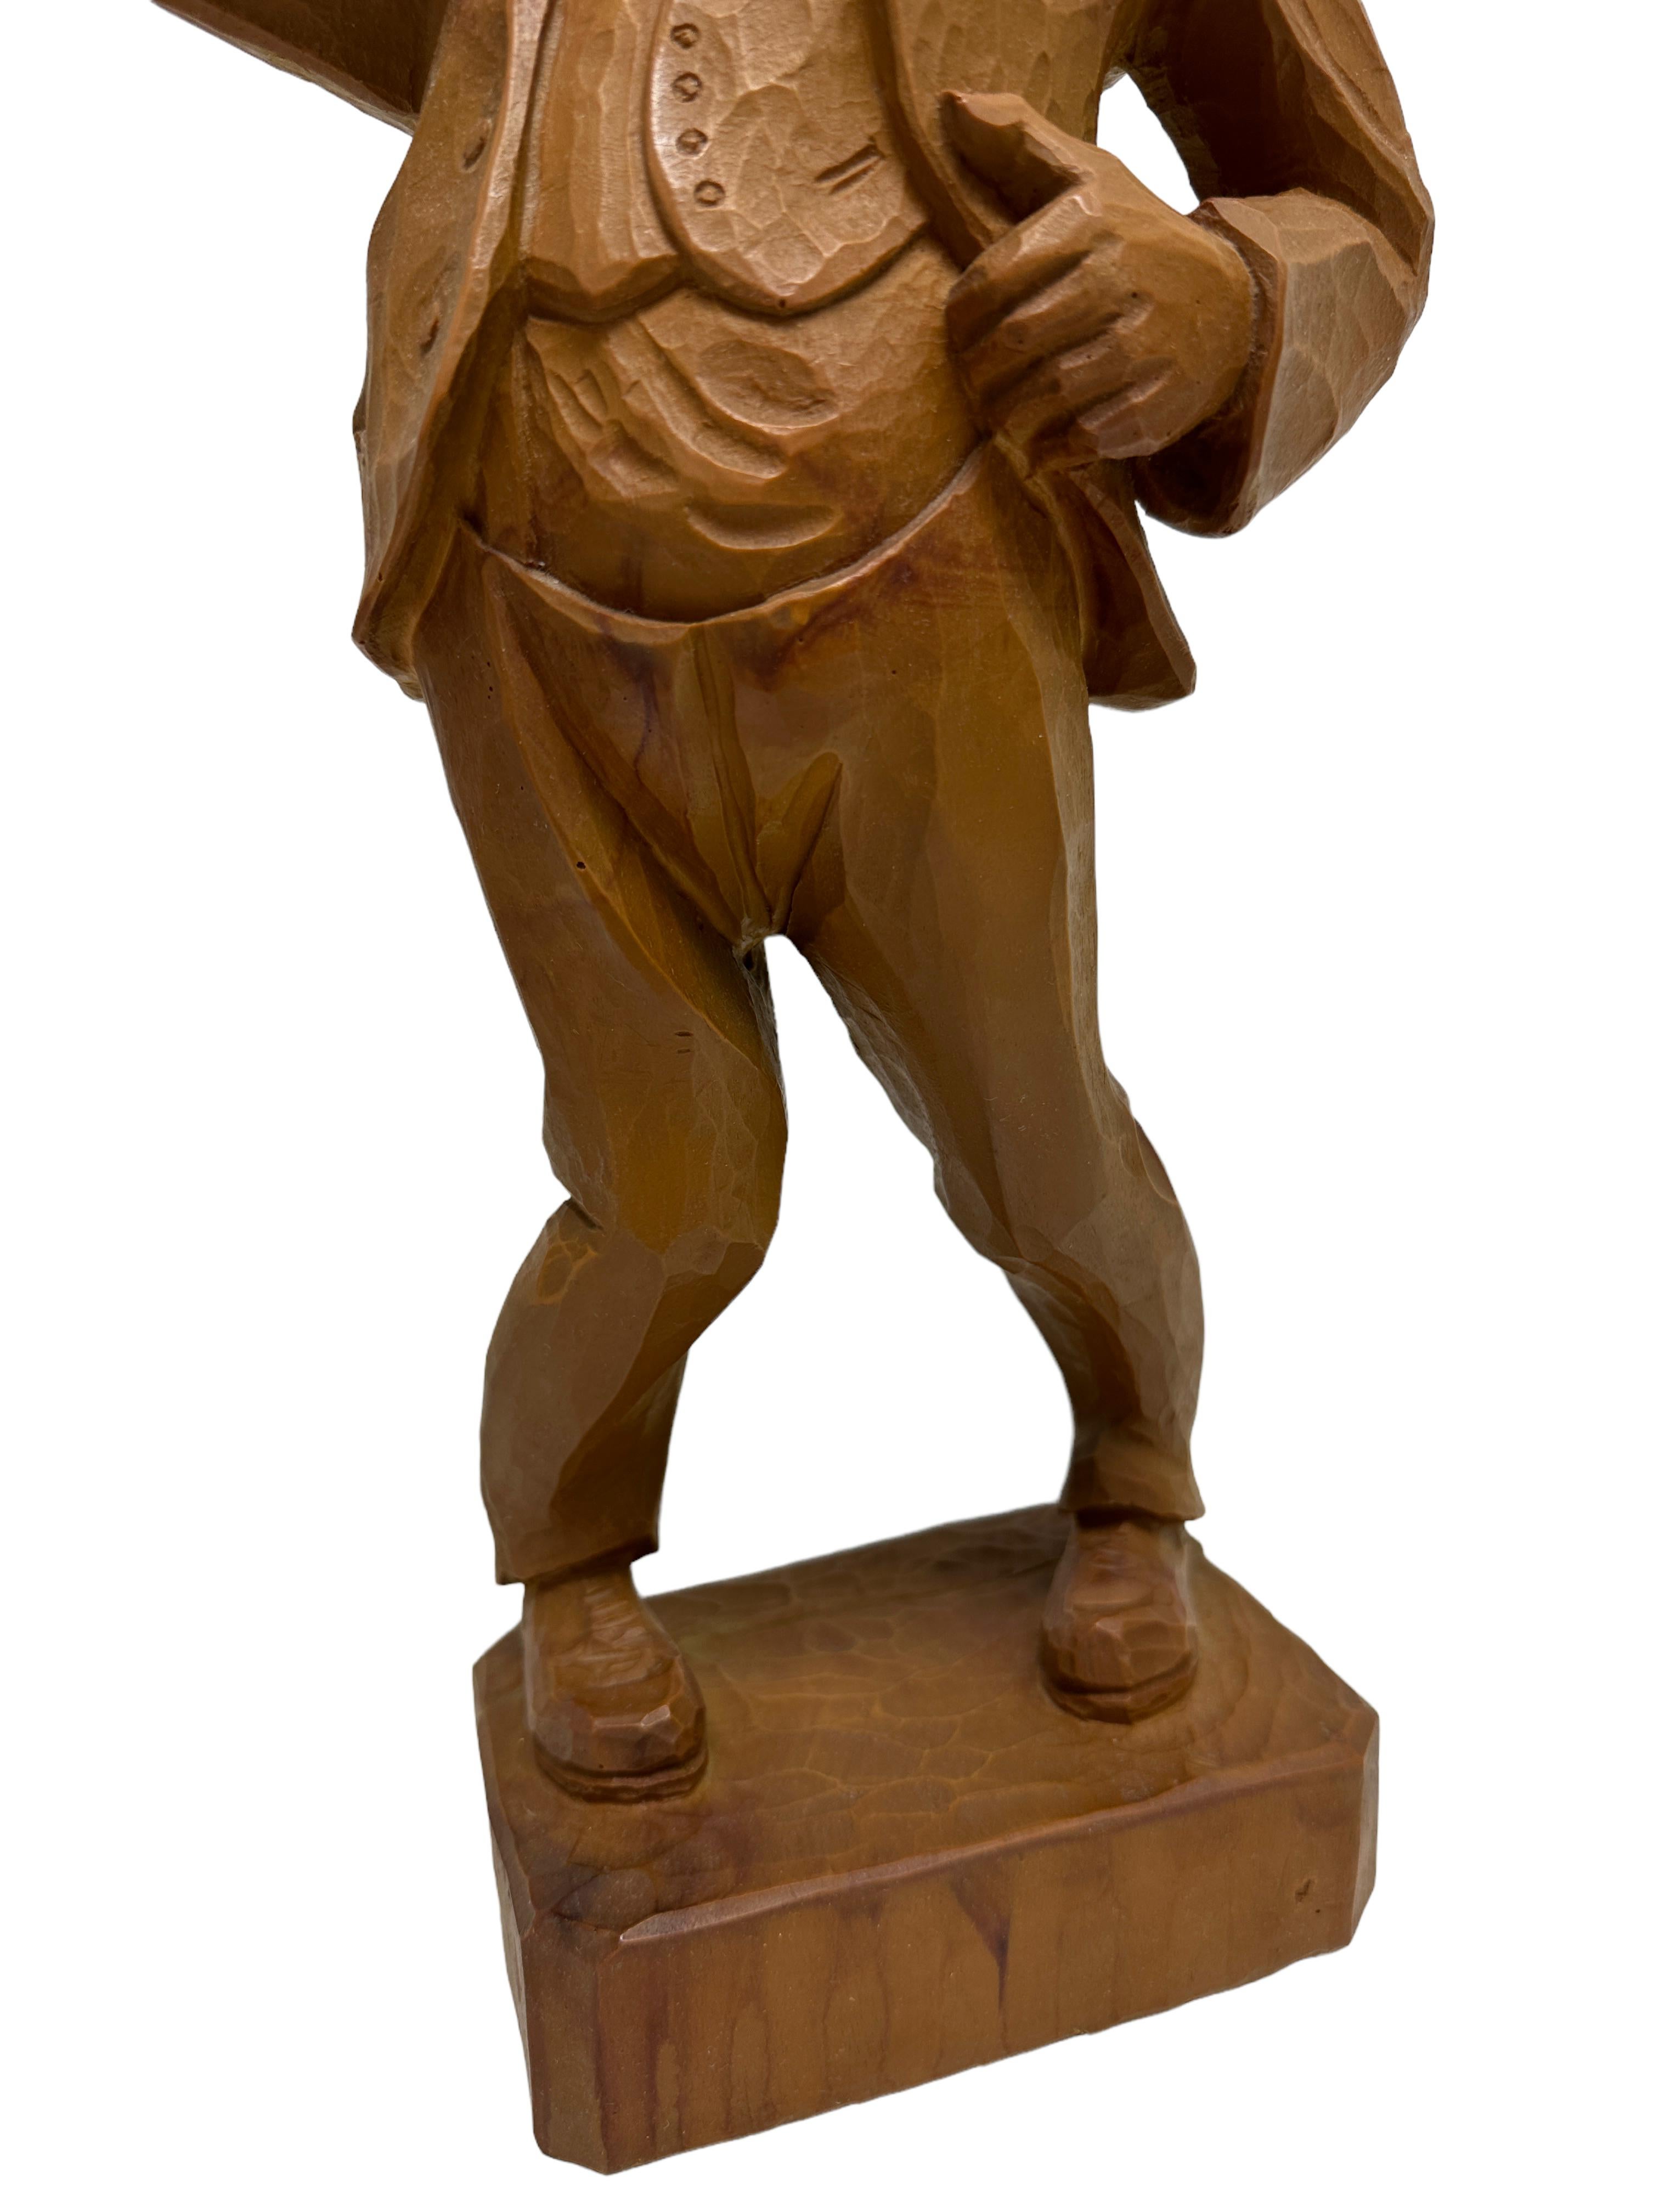 Hand-Carved Folk Art 20th Century Carved Wood Man Holding a Beer Stein, Austria 1960s For Sale